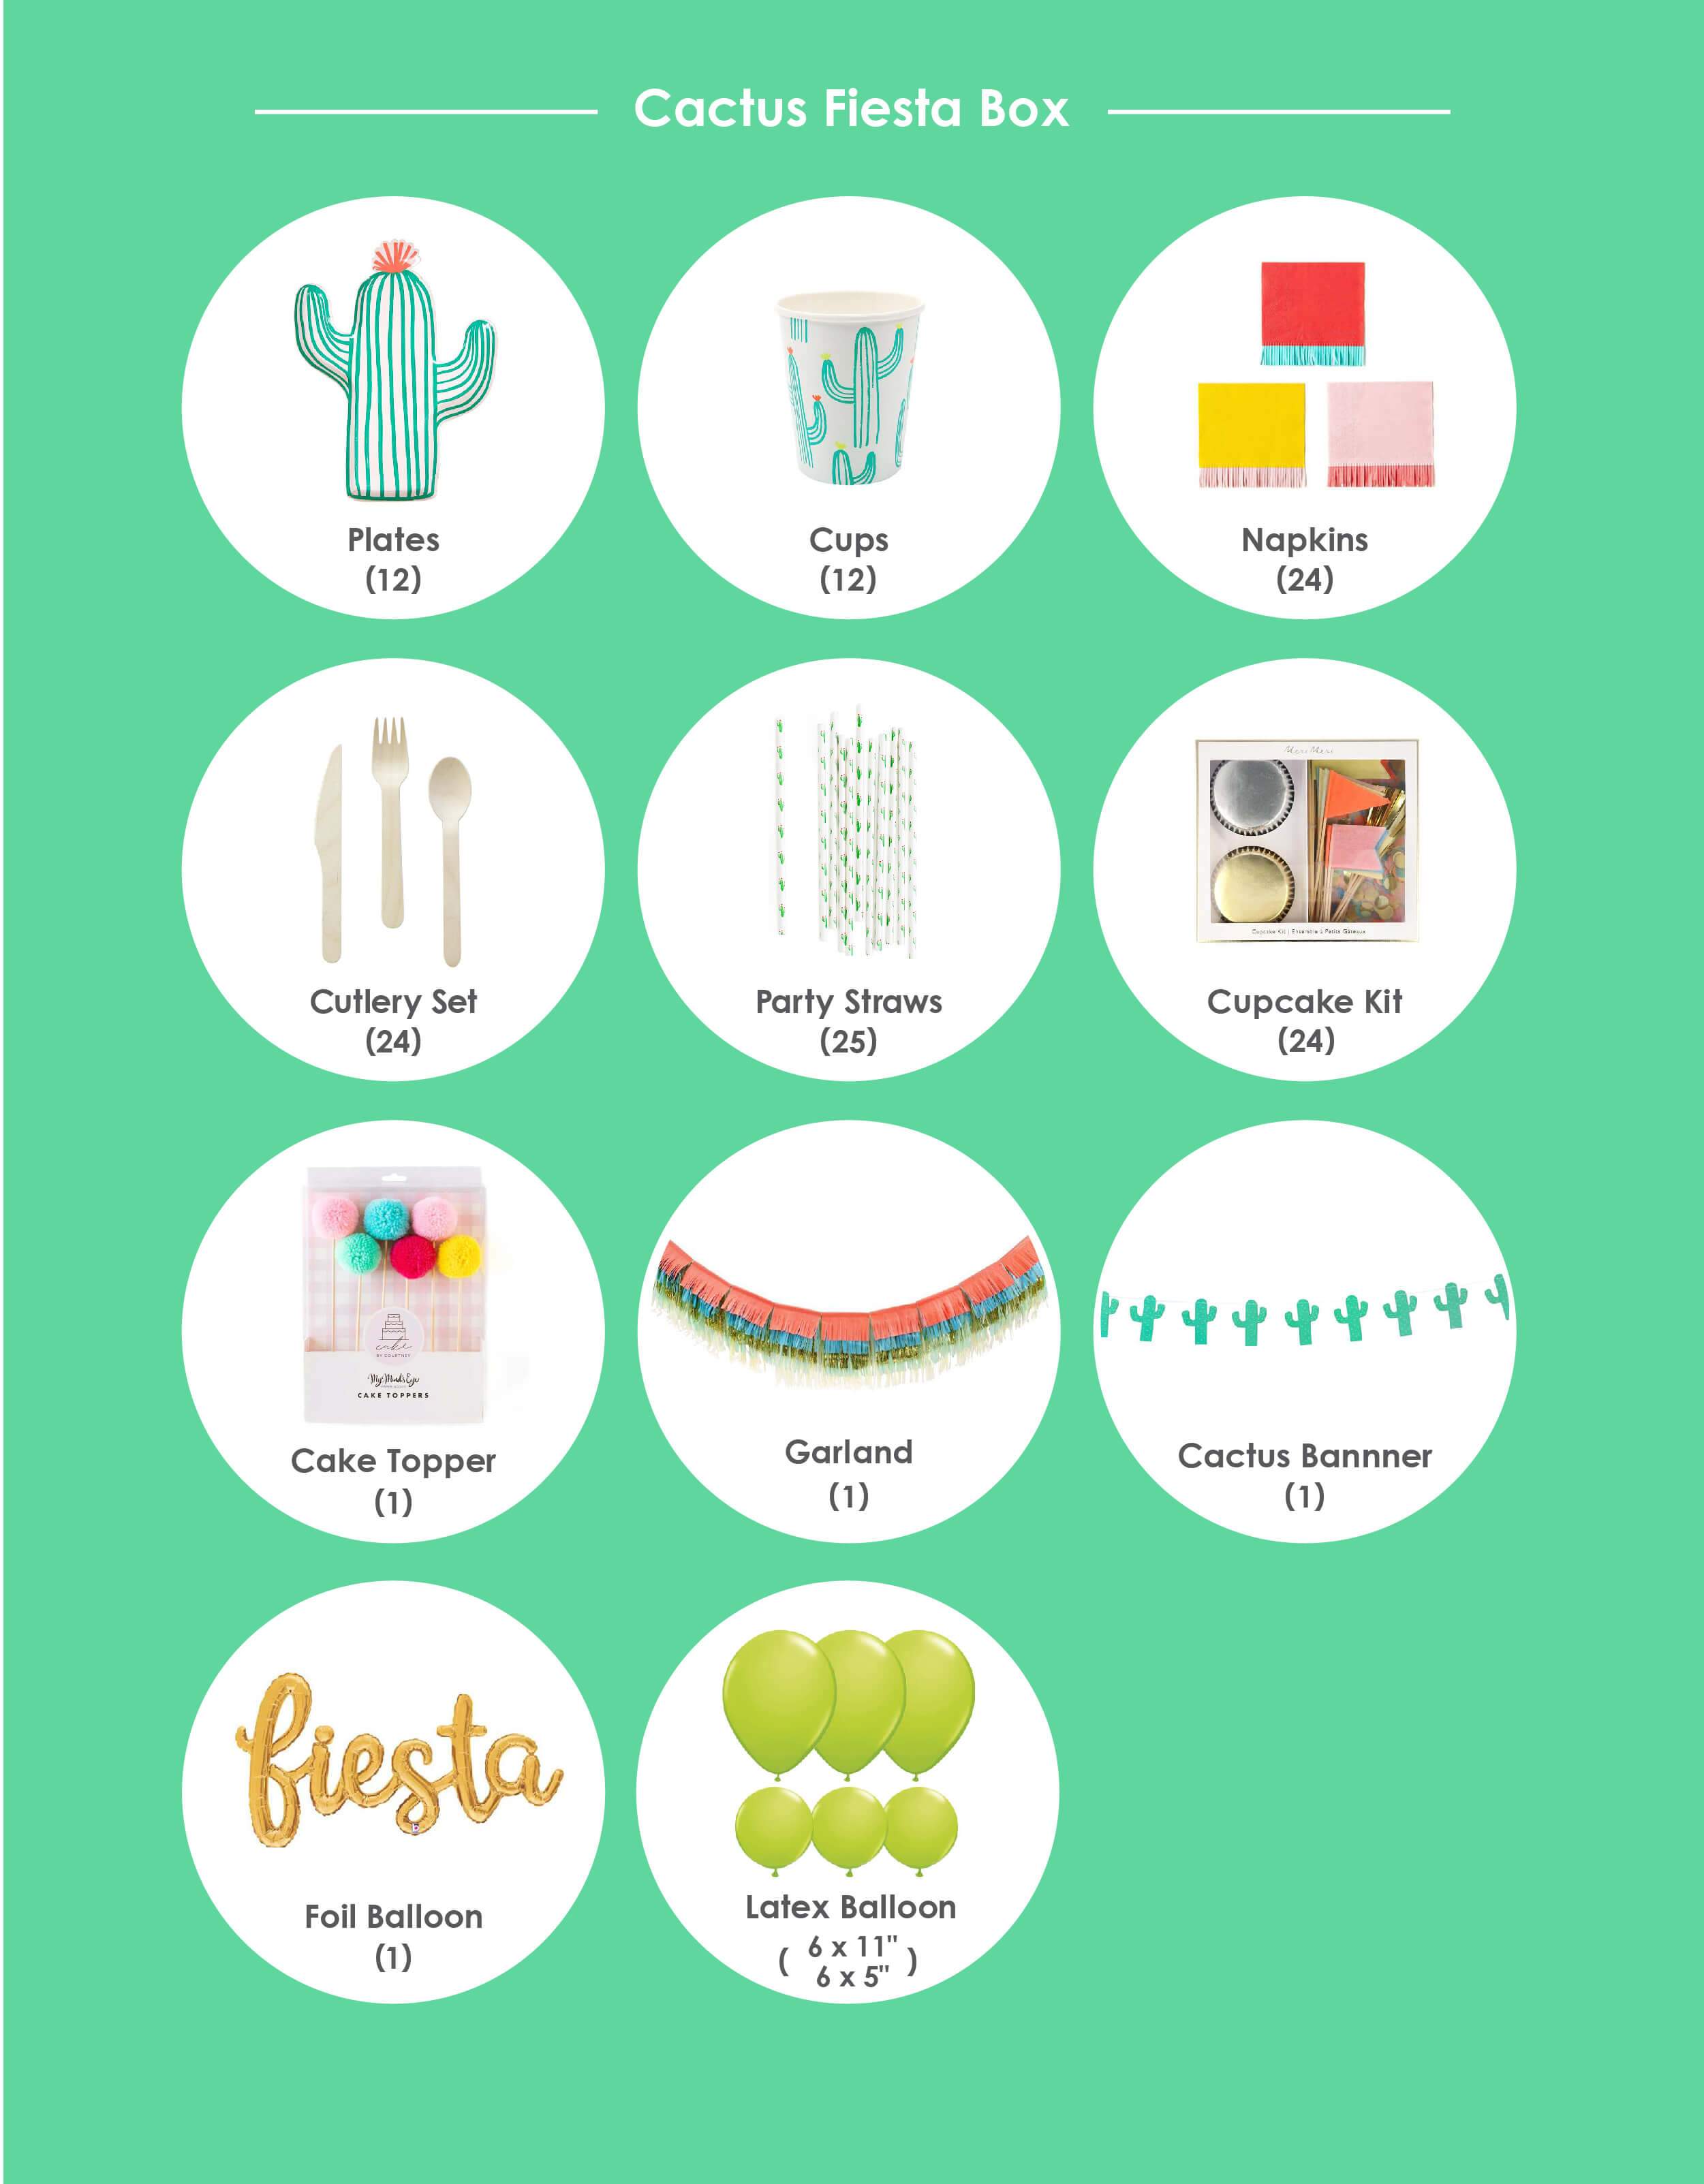 Momo party box item list for Cactus Fiesta themed Morden Party